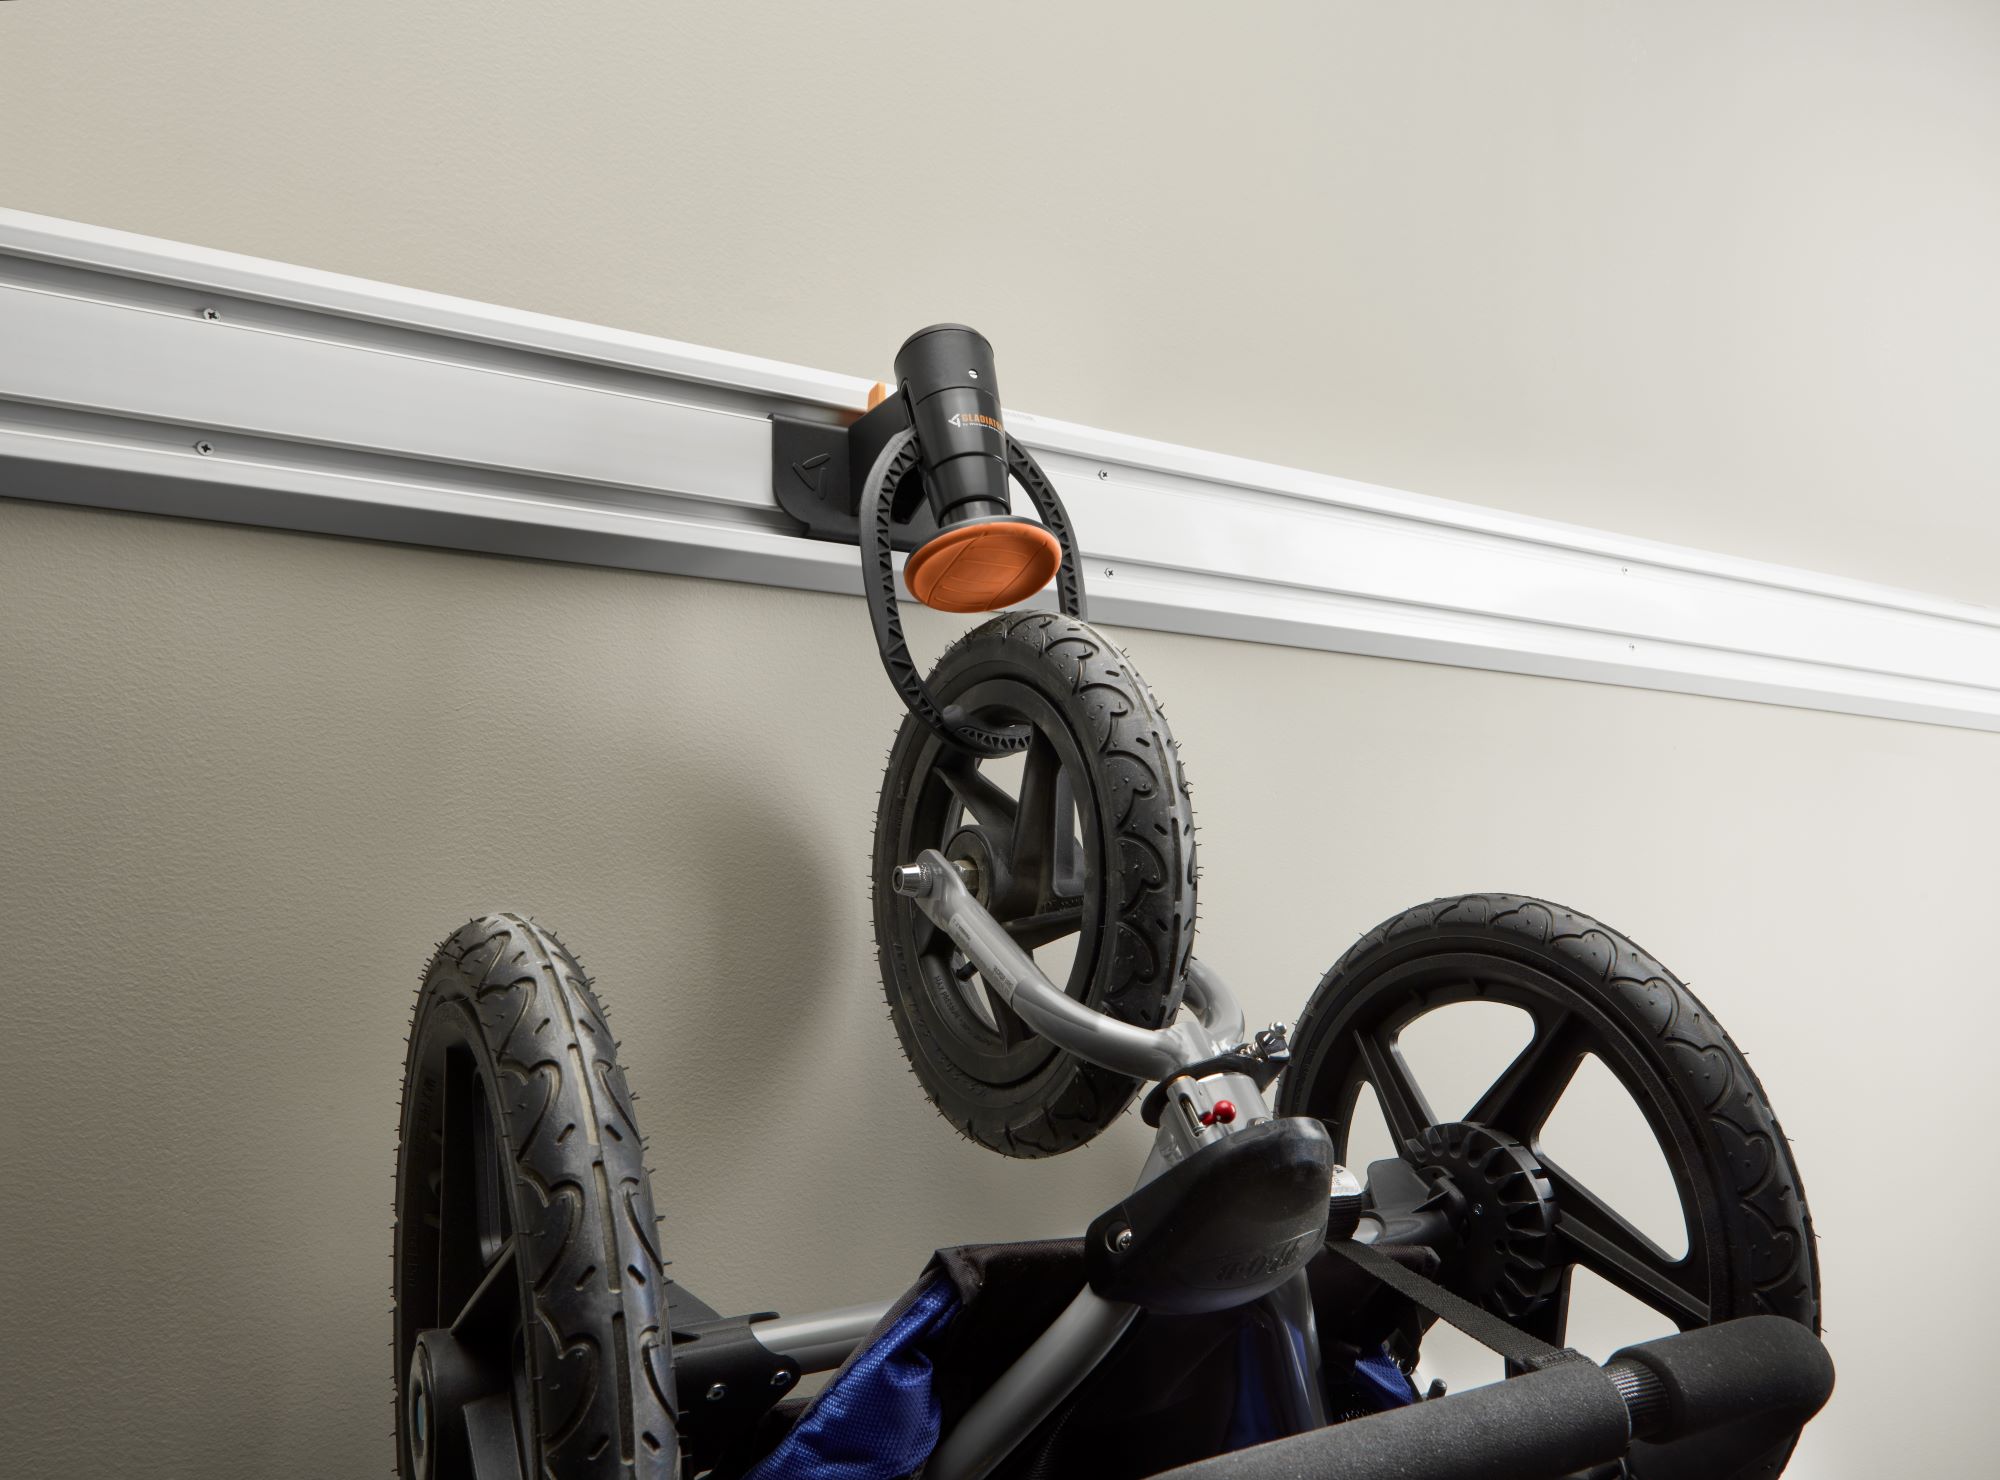 Gladiator Advanced Ceiling Mount Claw Bike Hook GACEXXCPVK - The